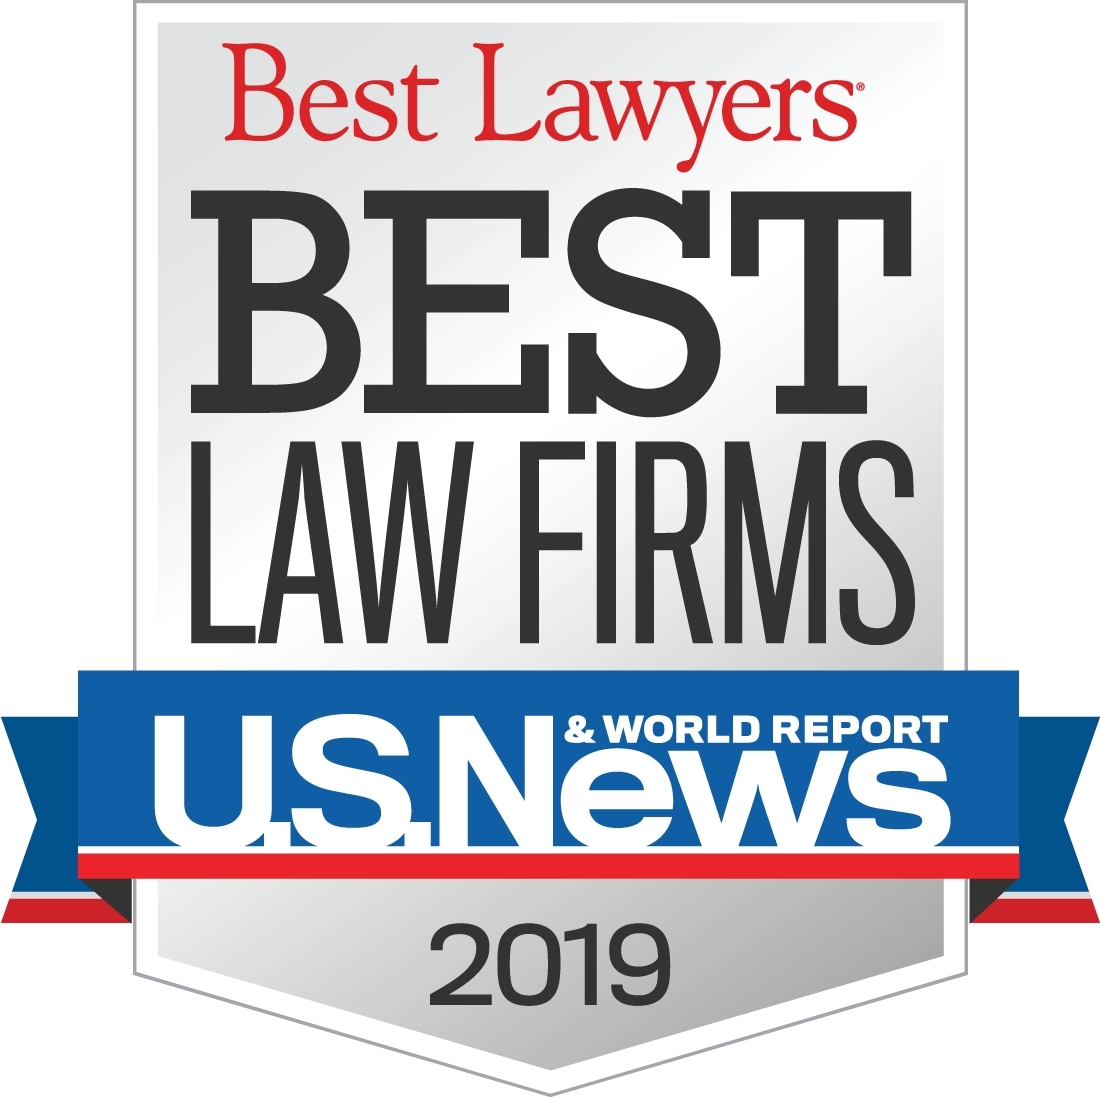 Marasco & Nesselbush Listed in the U.S. News & World Report 2019 Best Law Firms